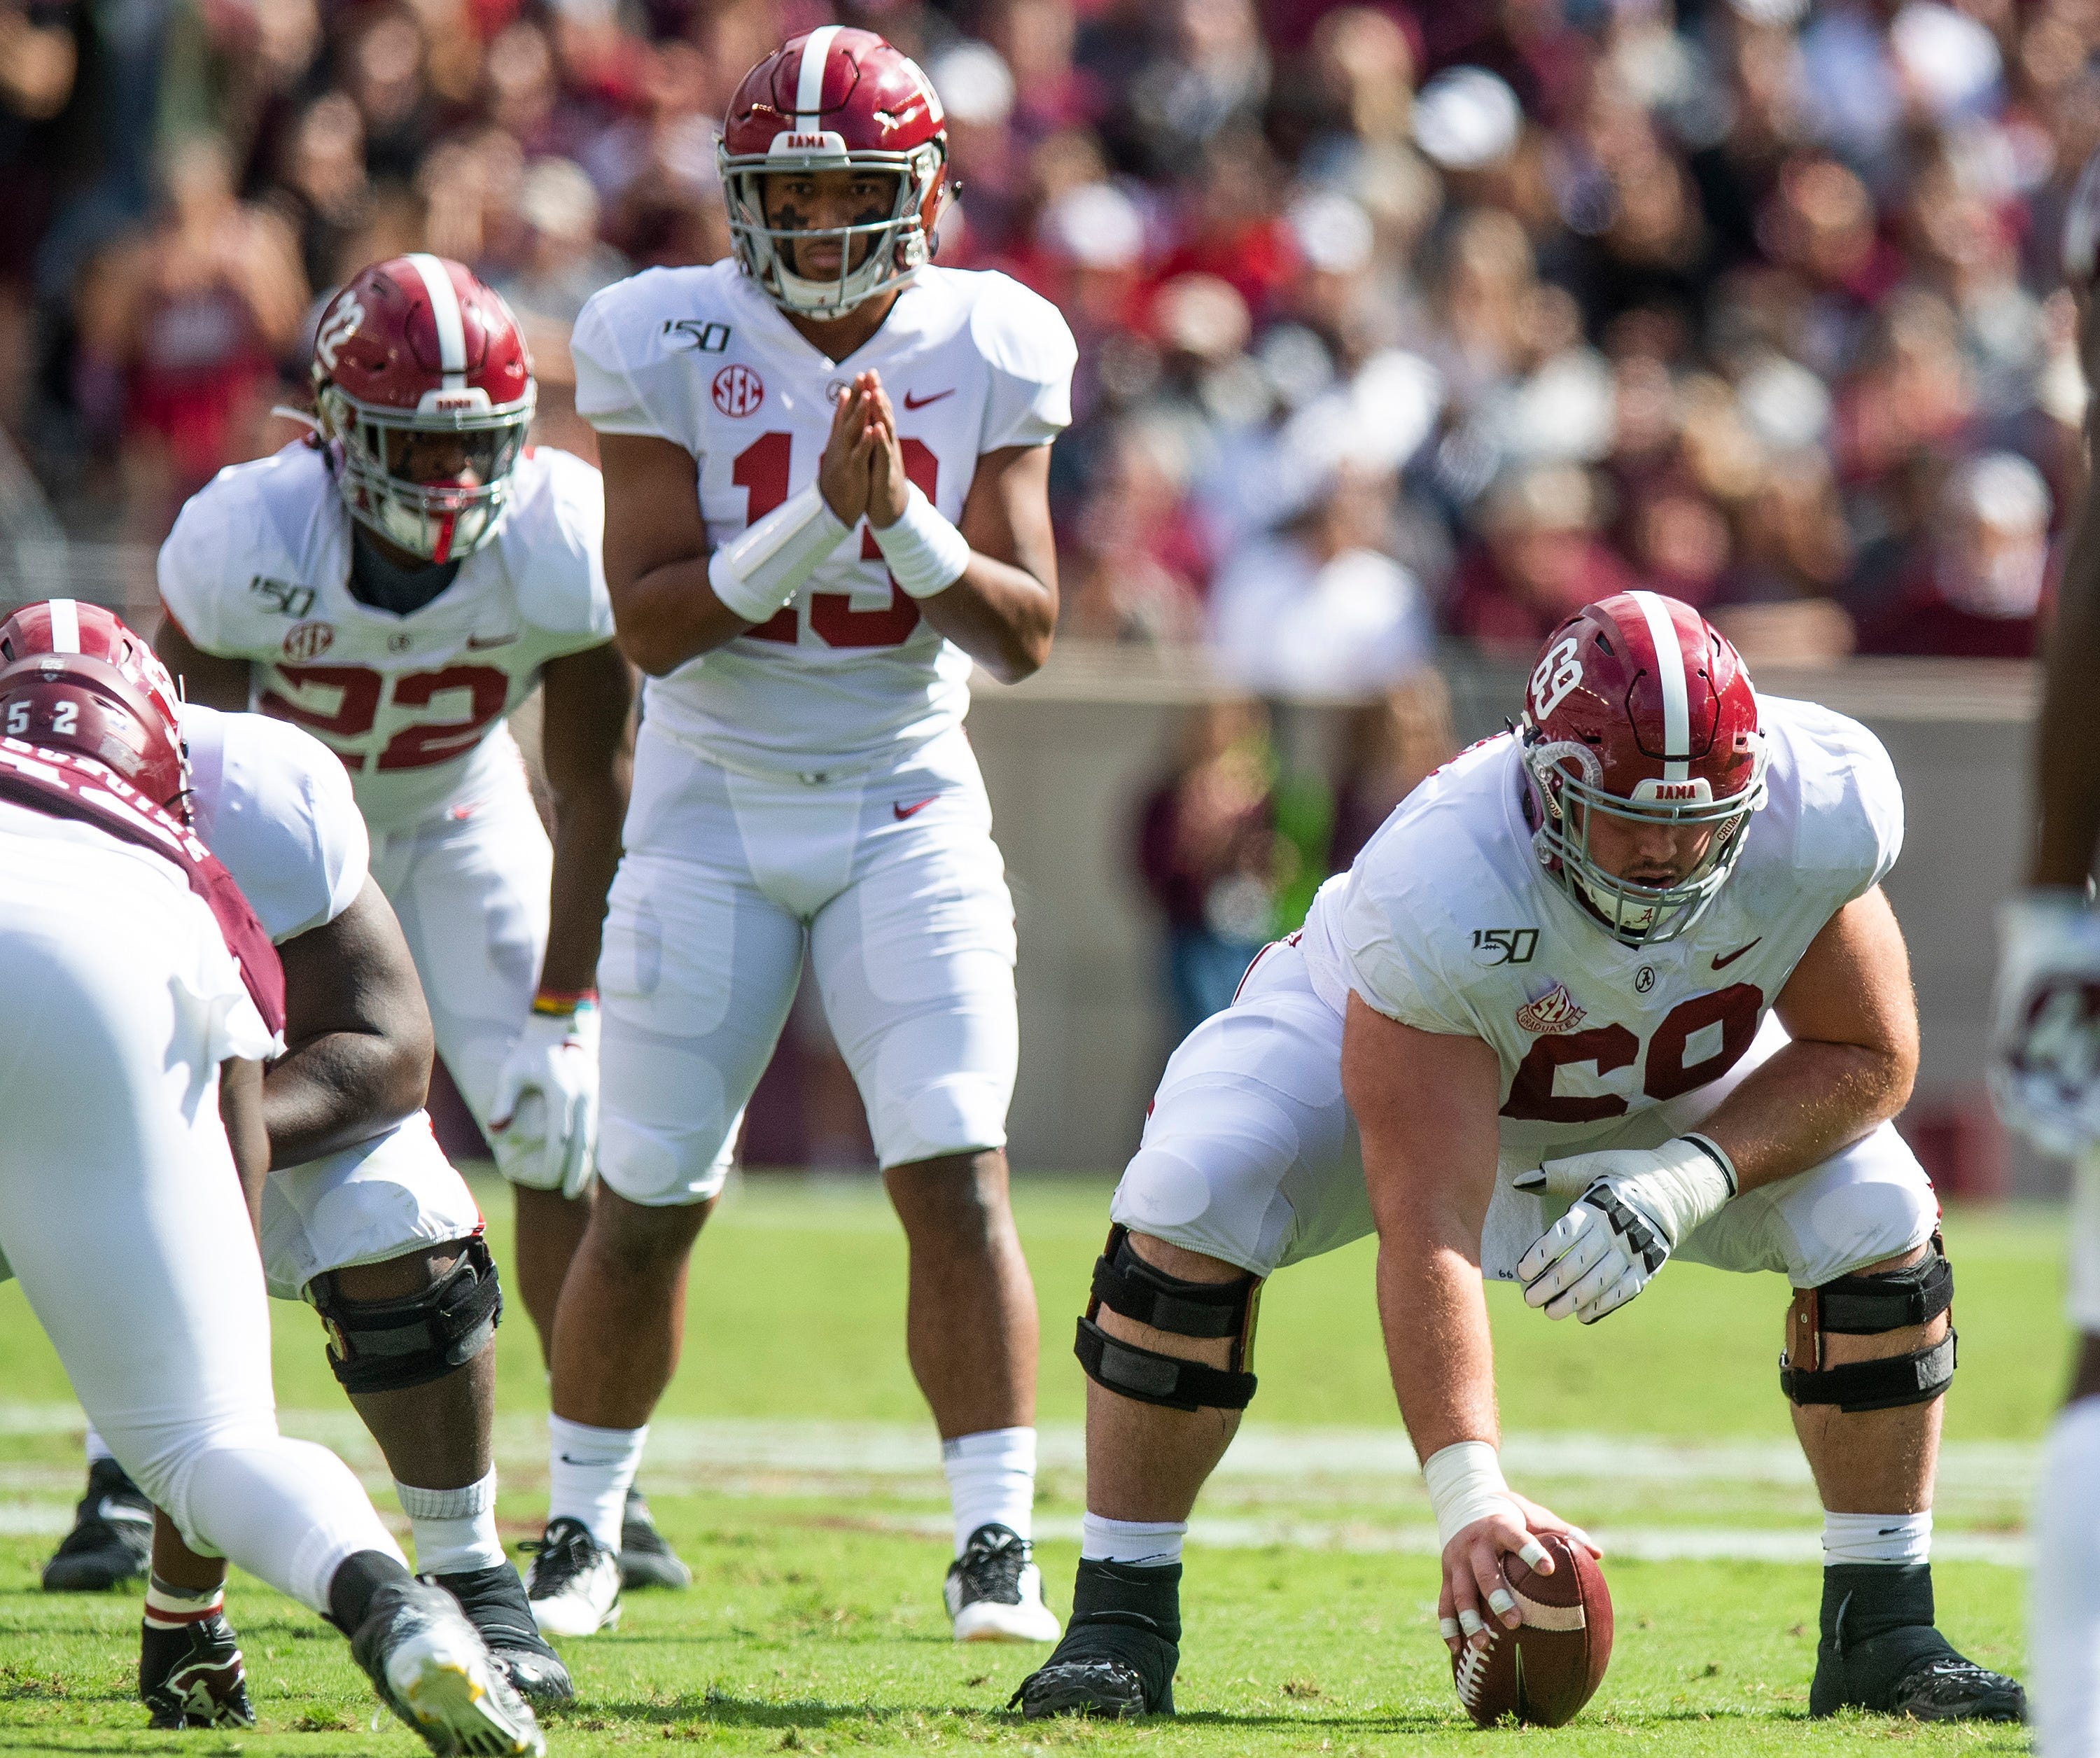 Alabama center Landon Dickerson (69) with quarterback Tua Tagovailoa (13) against Texas A&M at Kyle Field in College Station, Texas on Saturday October 12, 2019.